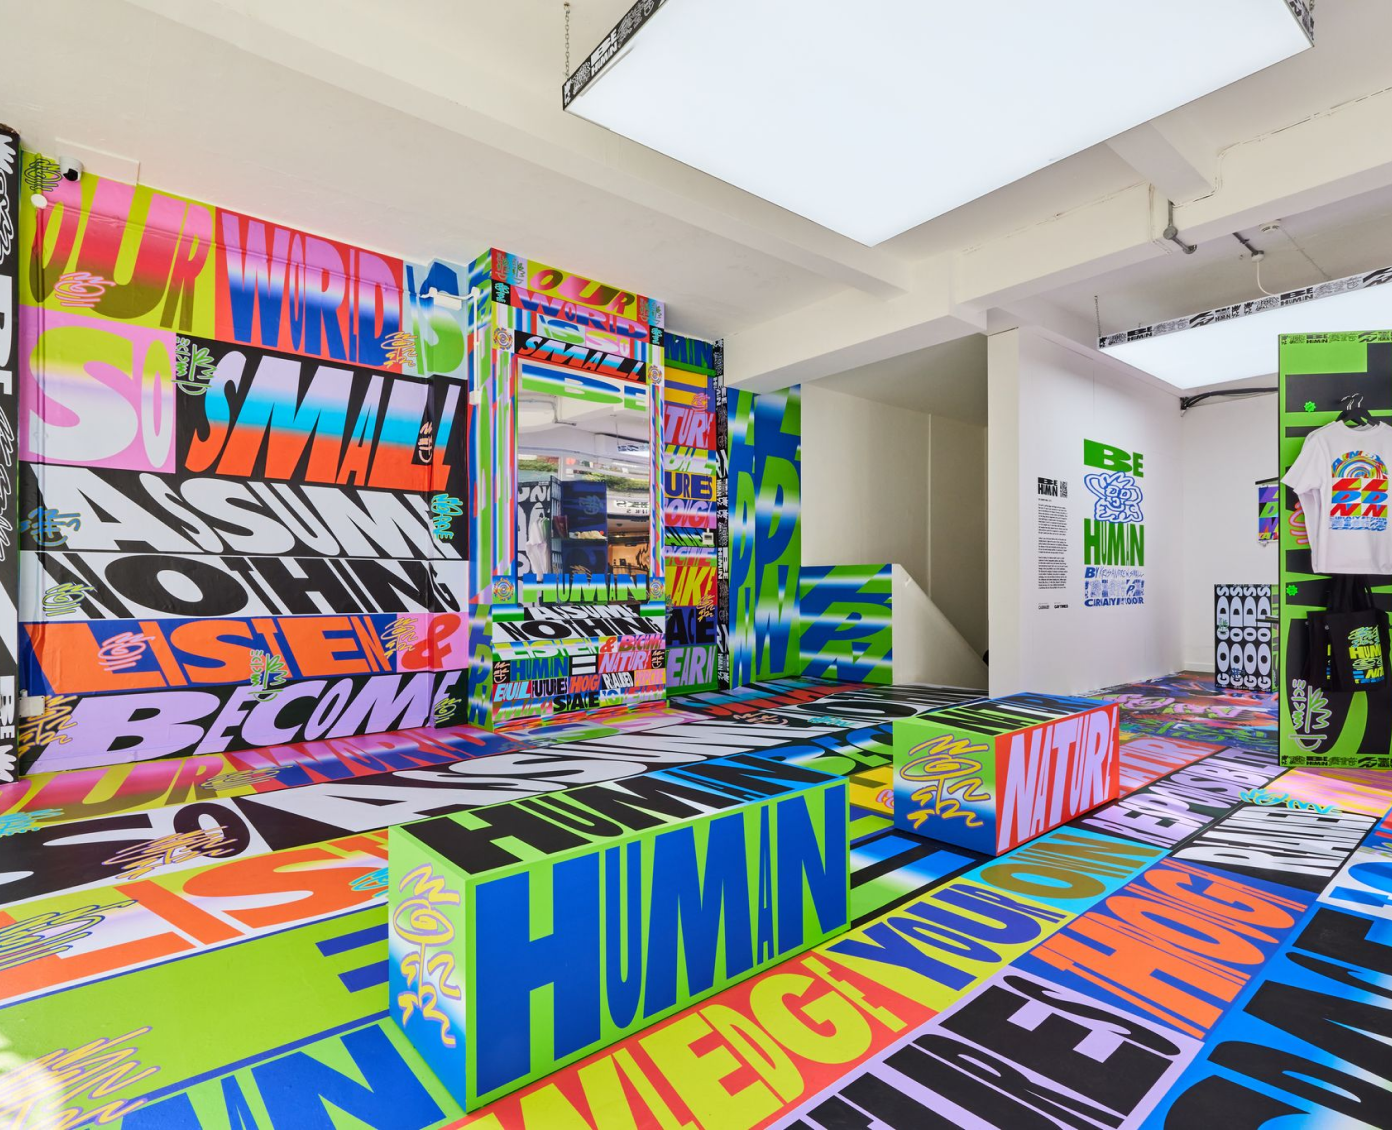 A room entirely covered with brightly coloured artwork by Kris Andrew Small